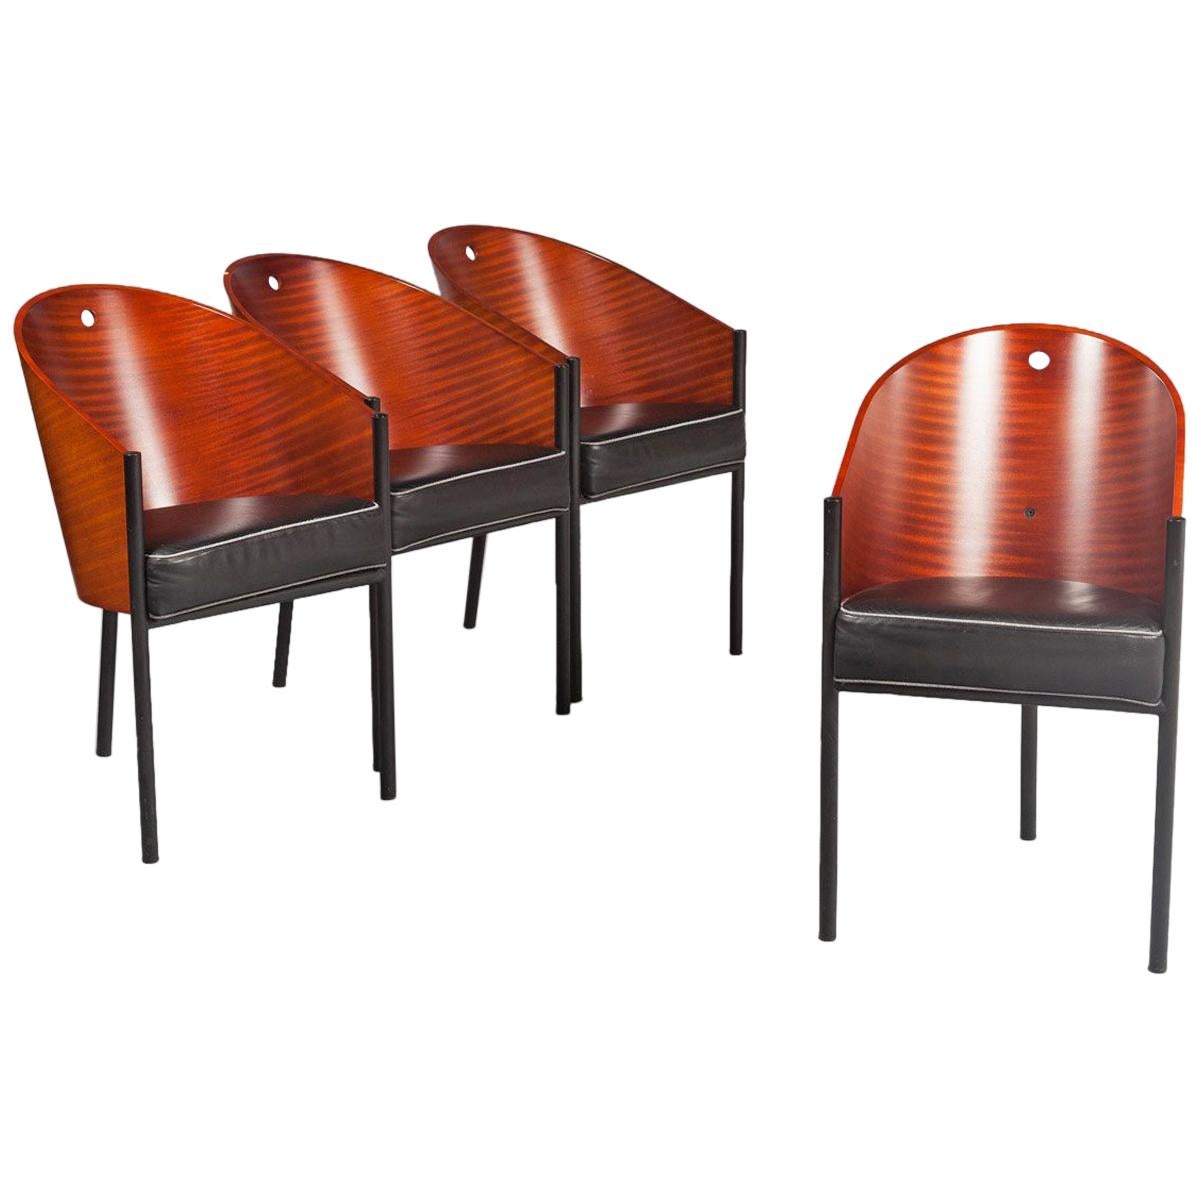 Philippe Starck Modern Wood and Black Leather Chairs, 1980s For Sale